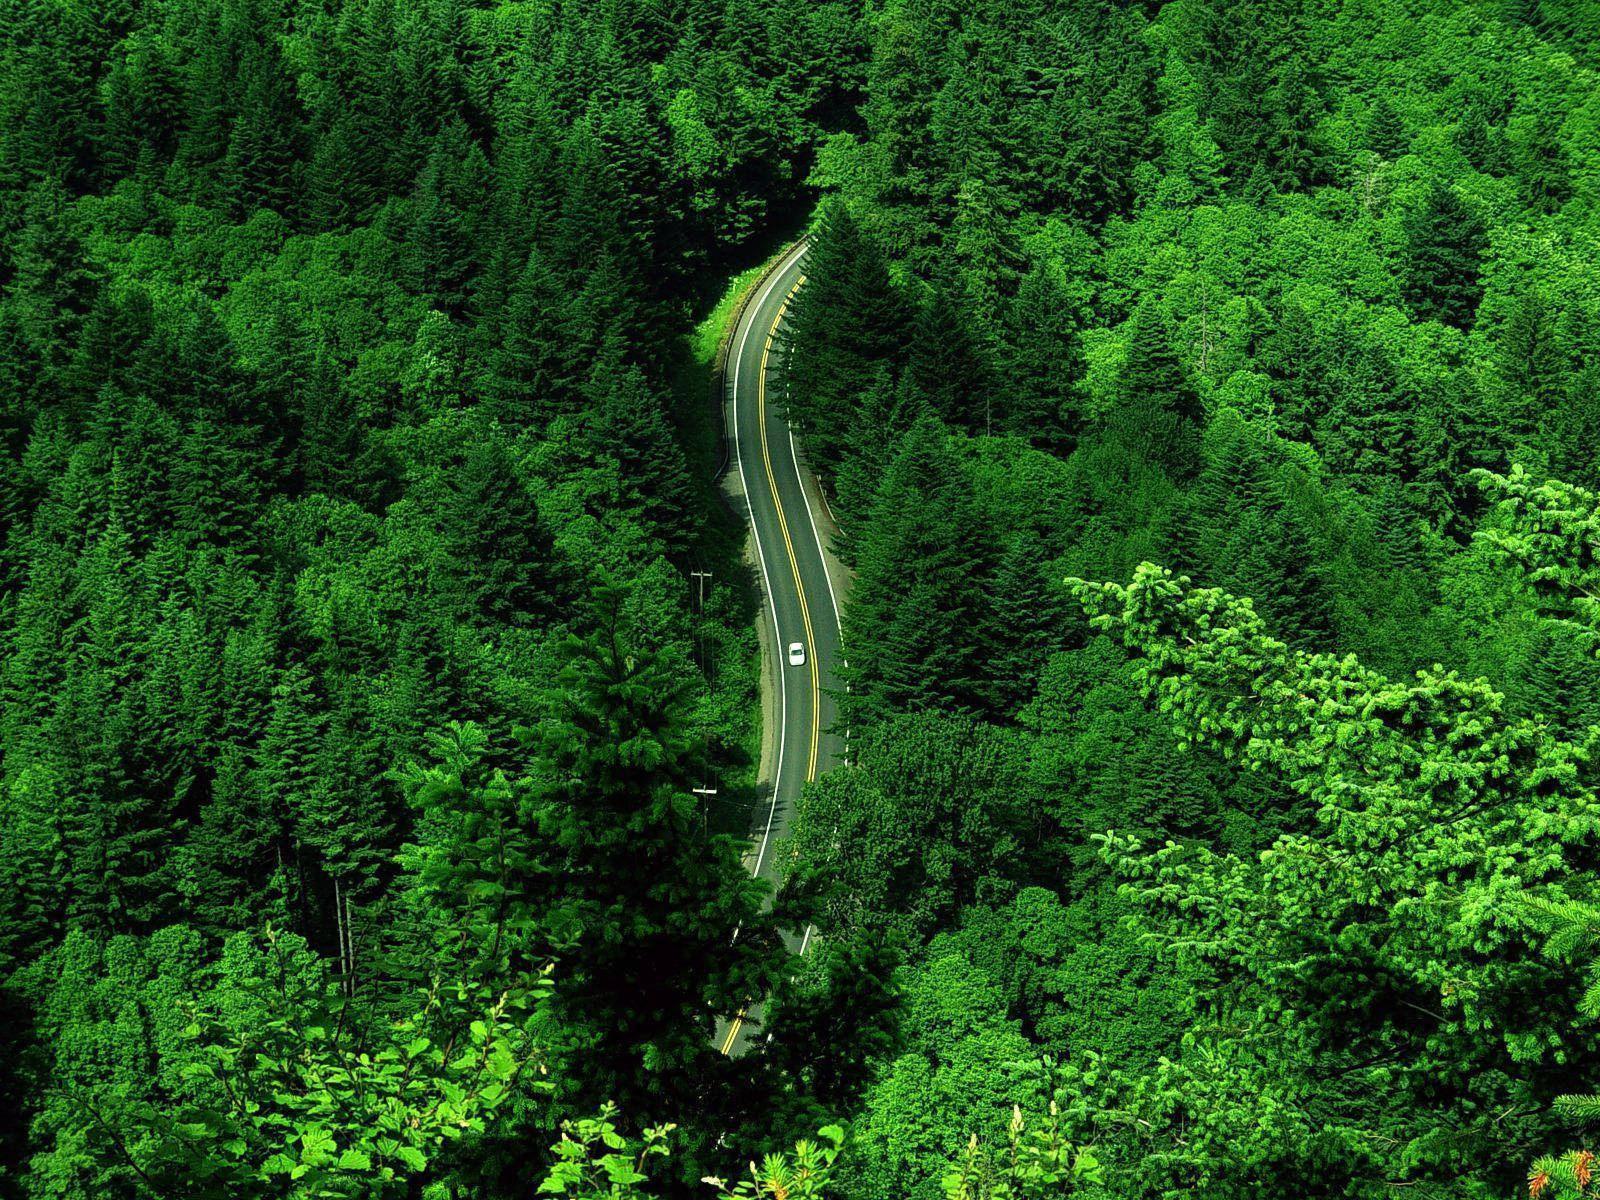 Winding Road Through The Greenery Background